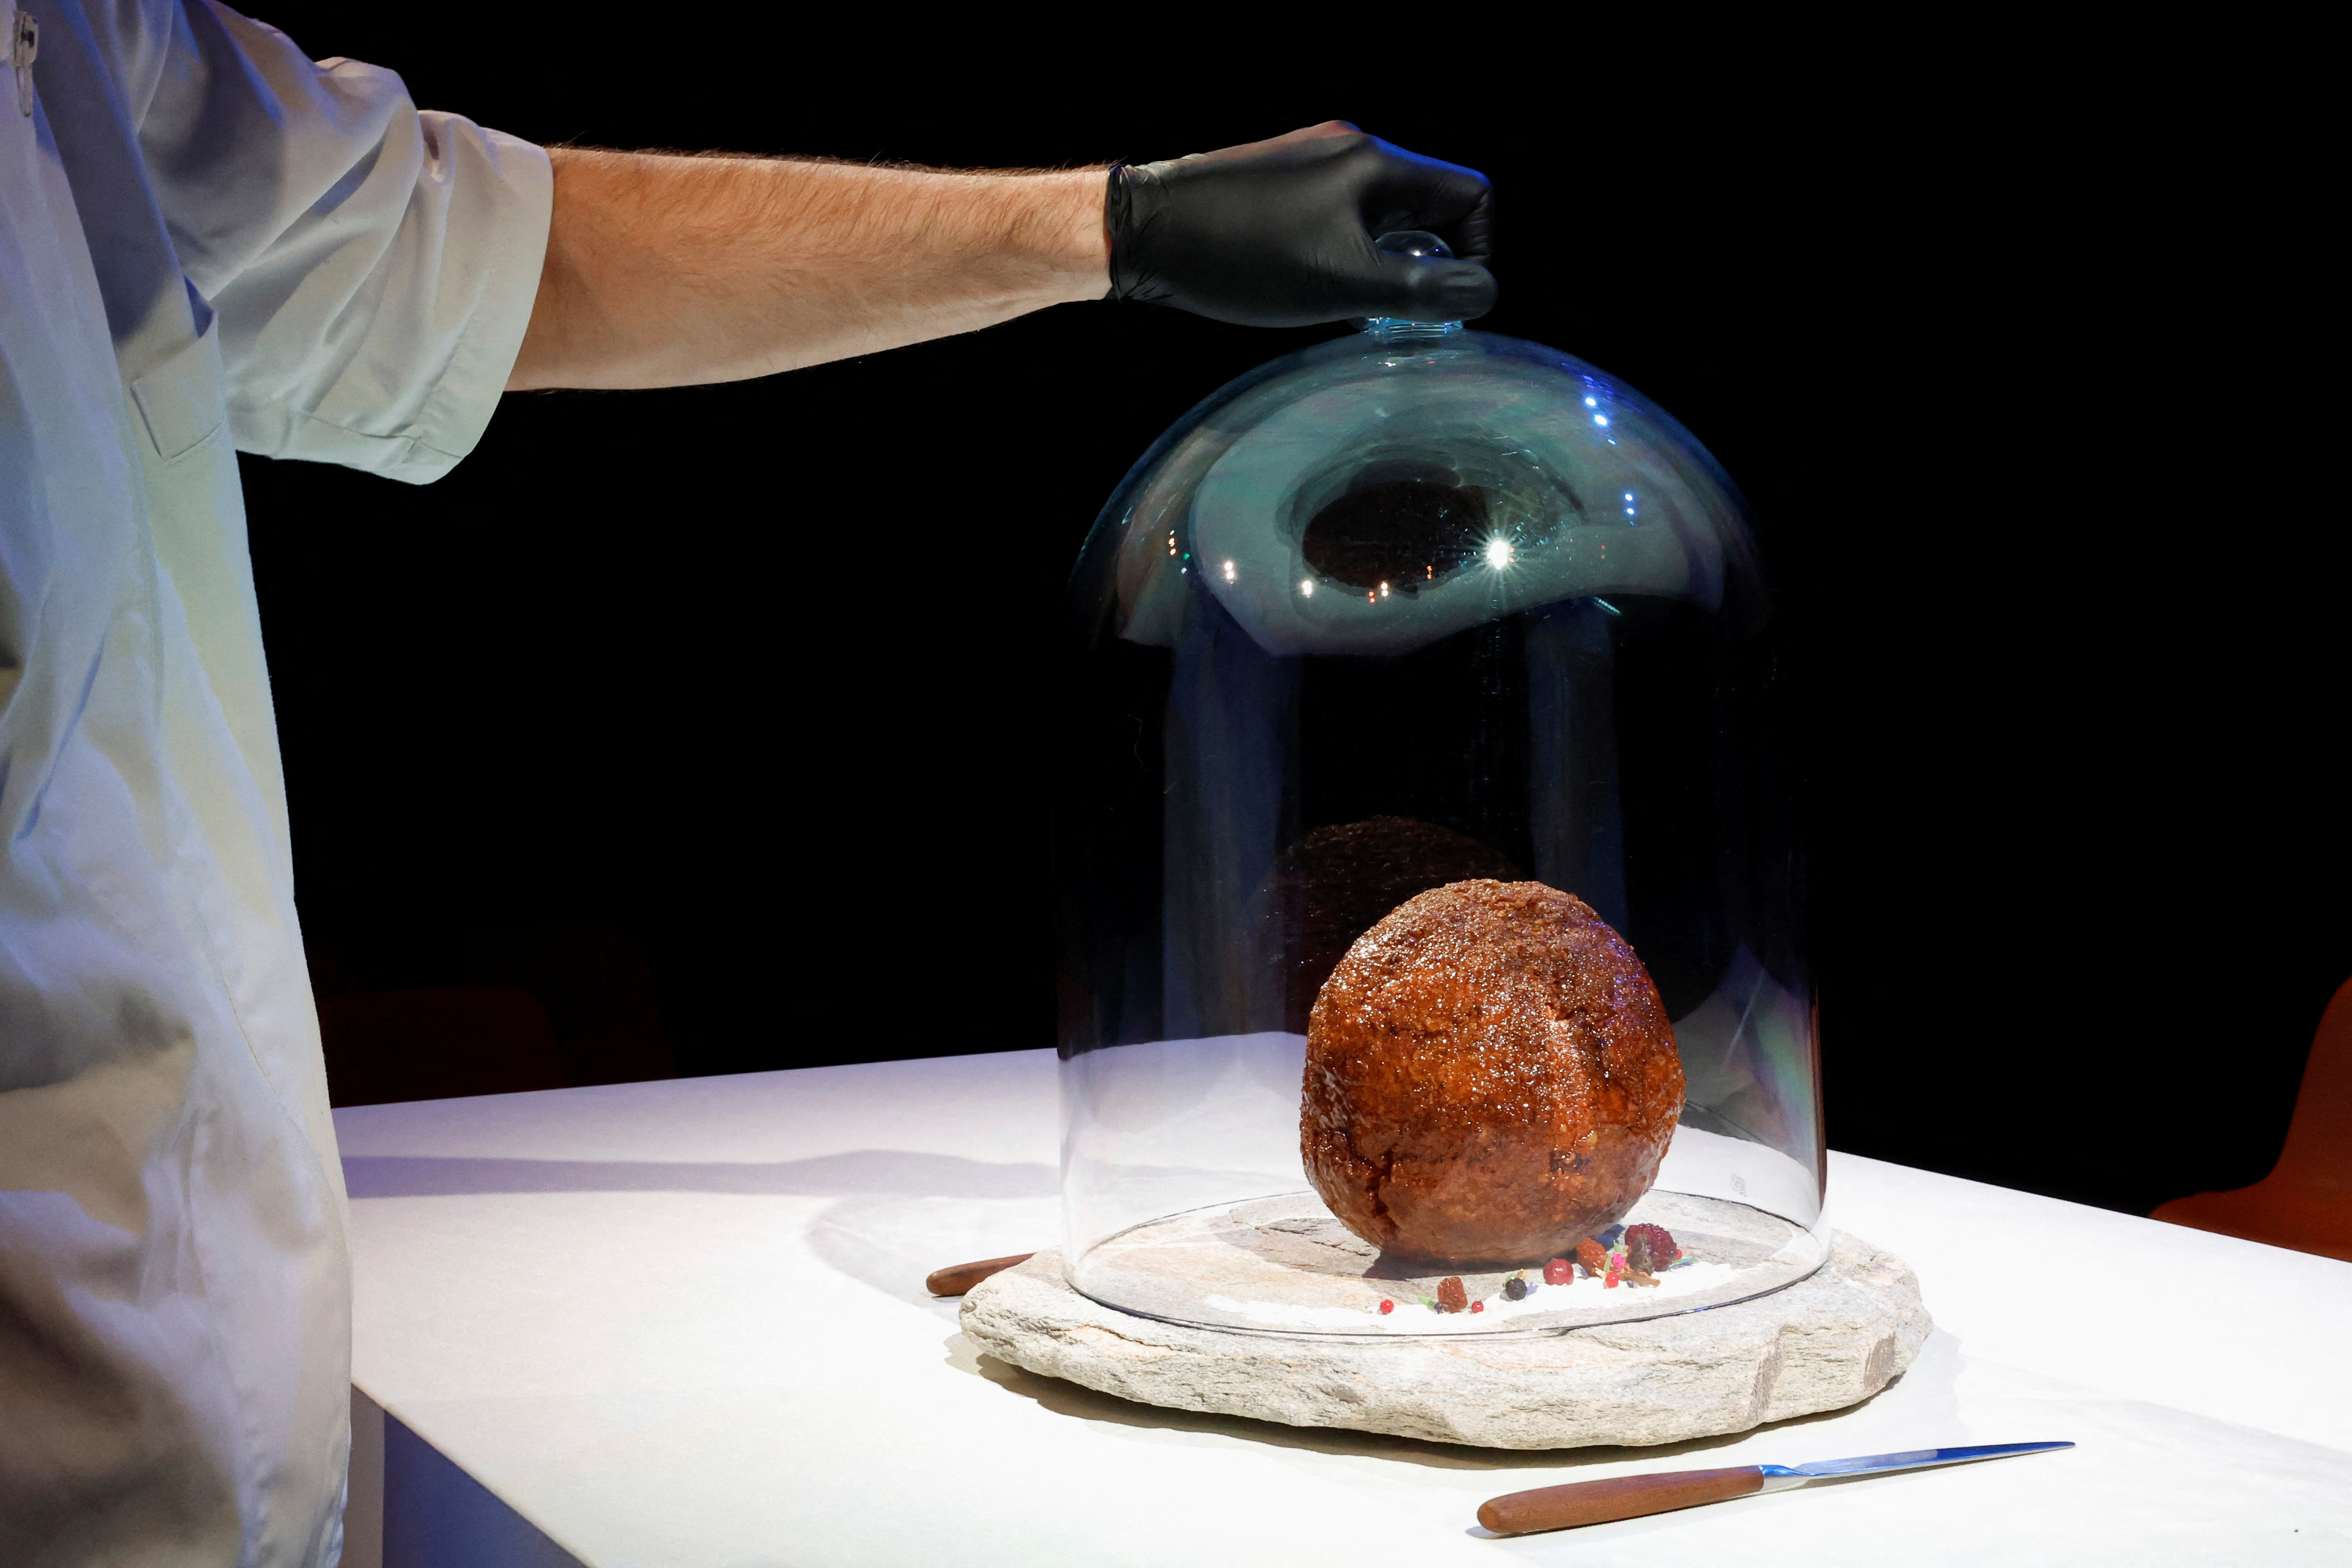 A mammoth meatball presented at NEMO Science Museum in Amsterdam